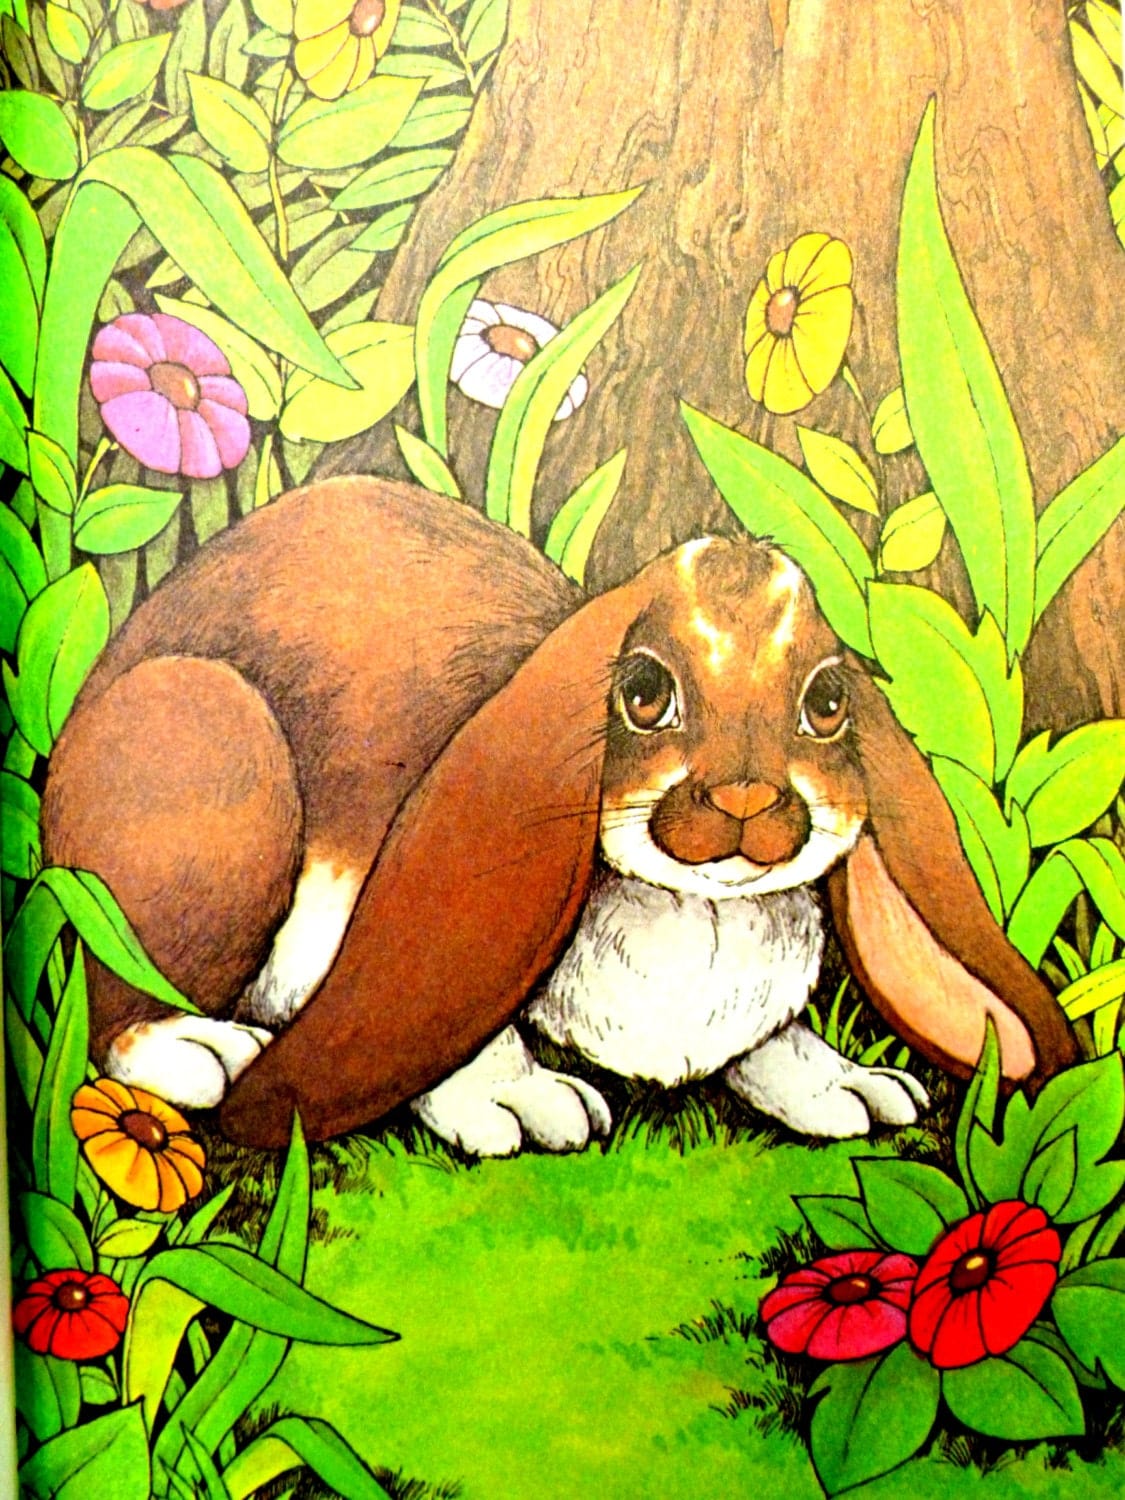 Leo the Lop Fun Lop Eared Bunny Rabbit Vintage Childrens Story Book Hardcover Cosgrove